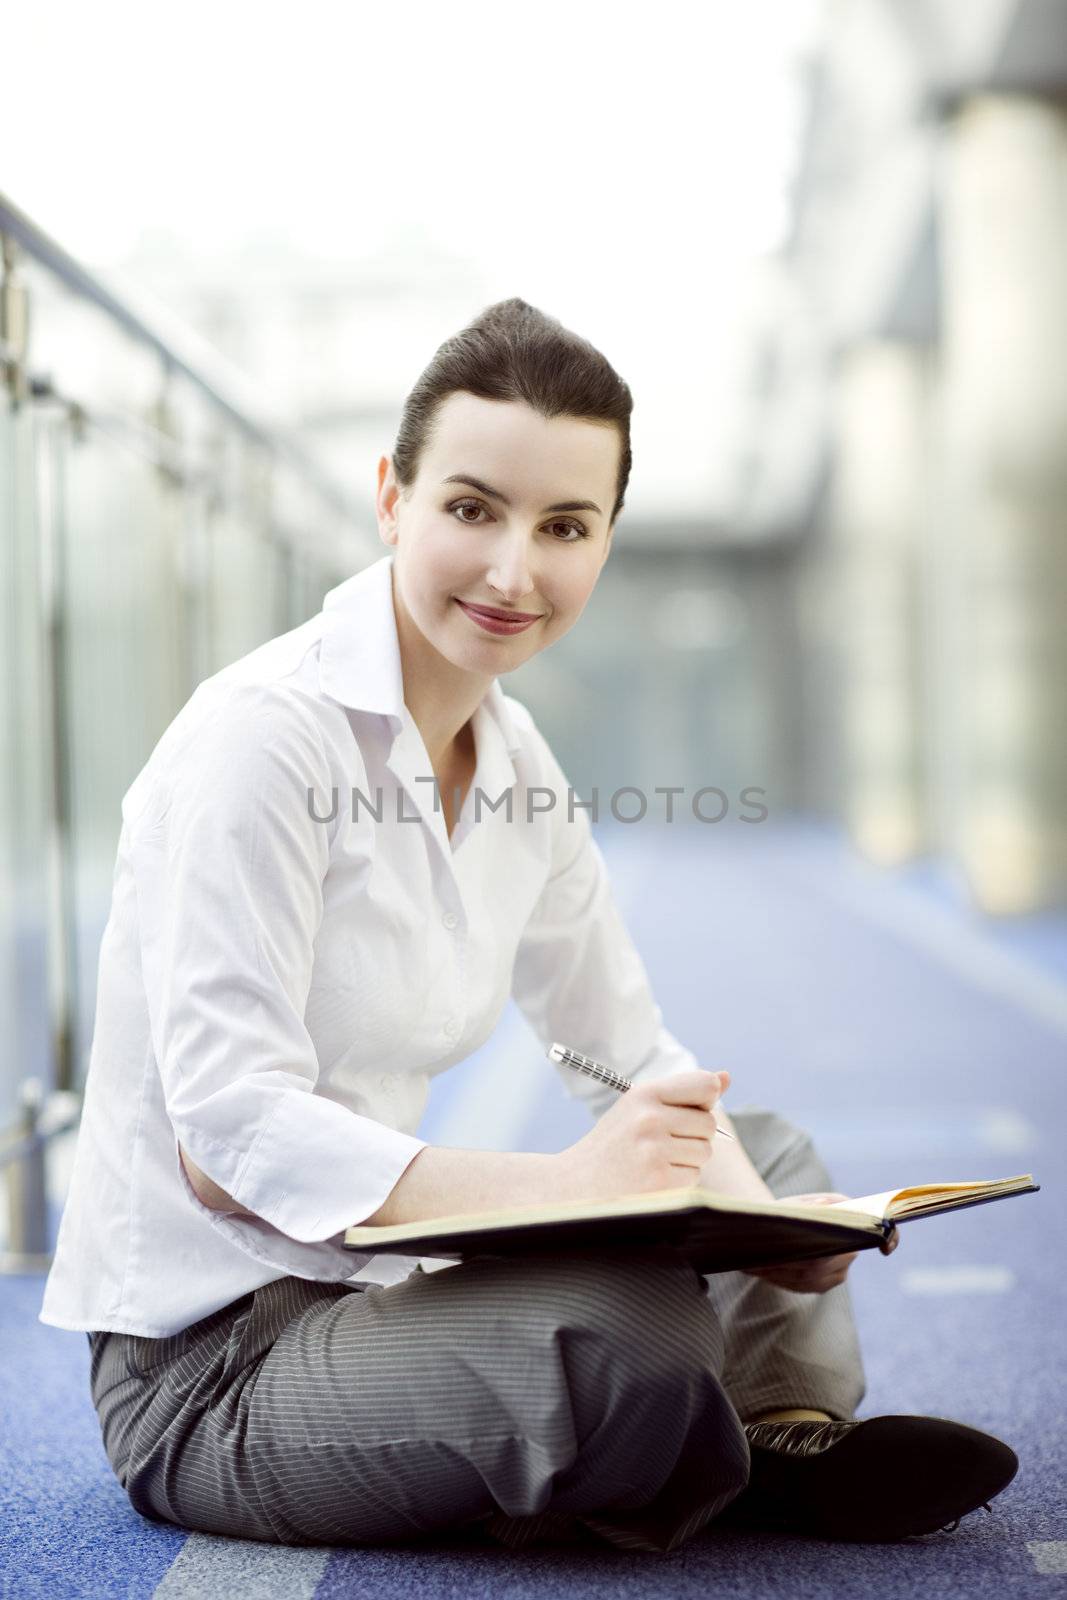 Businesswoman is sitting on the floor with a calendar on hewr lap